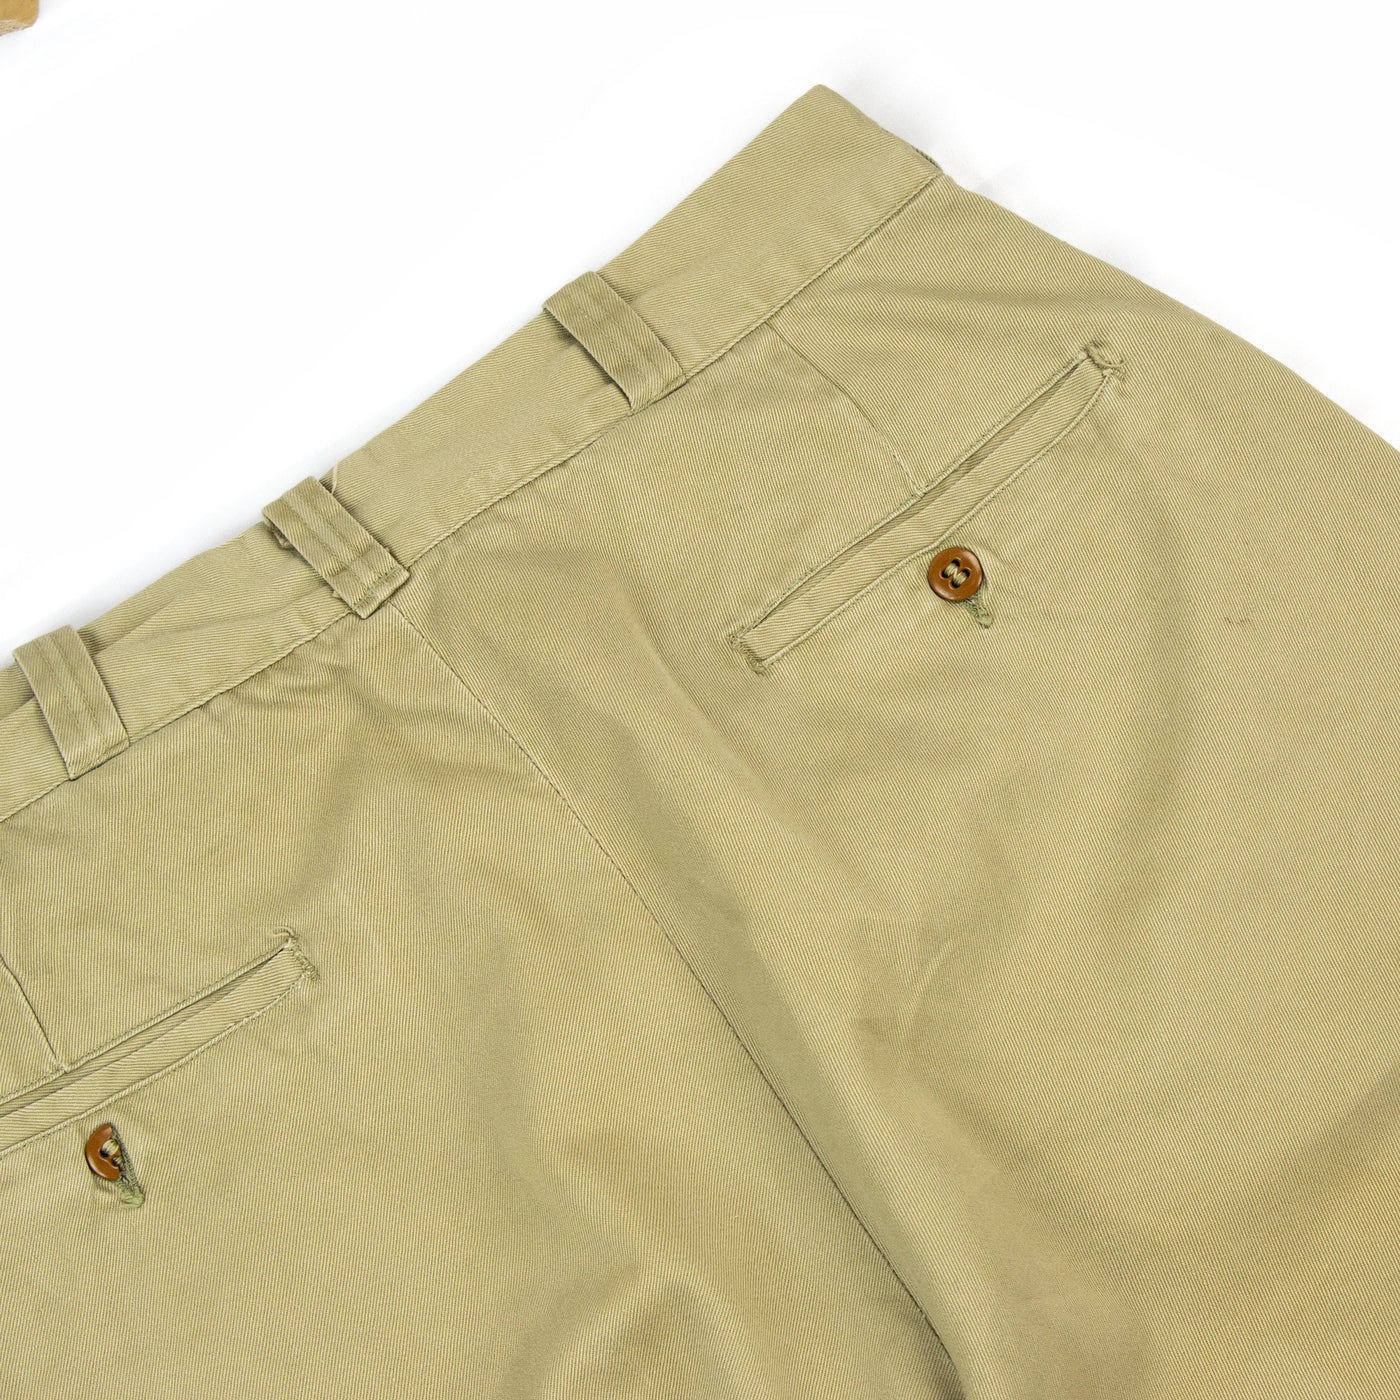 Vintage 1950s US Army Officers Military Chino Trousers Khaki - 27